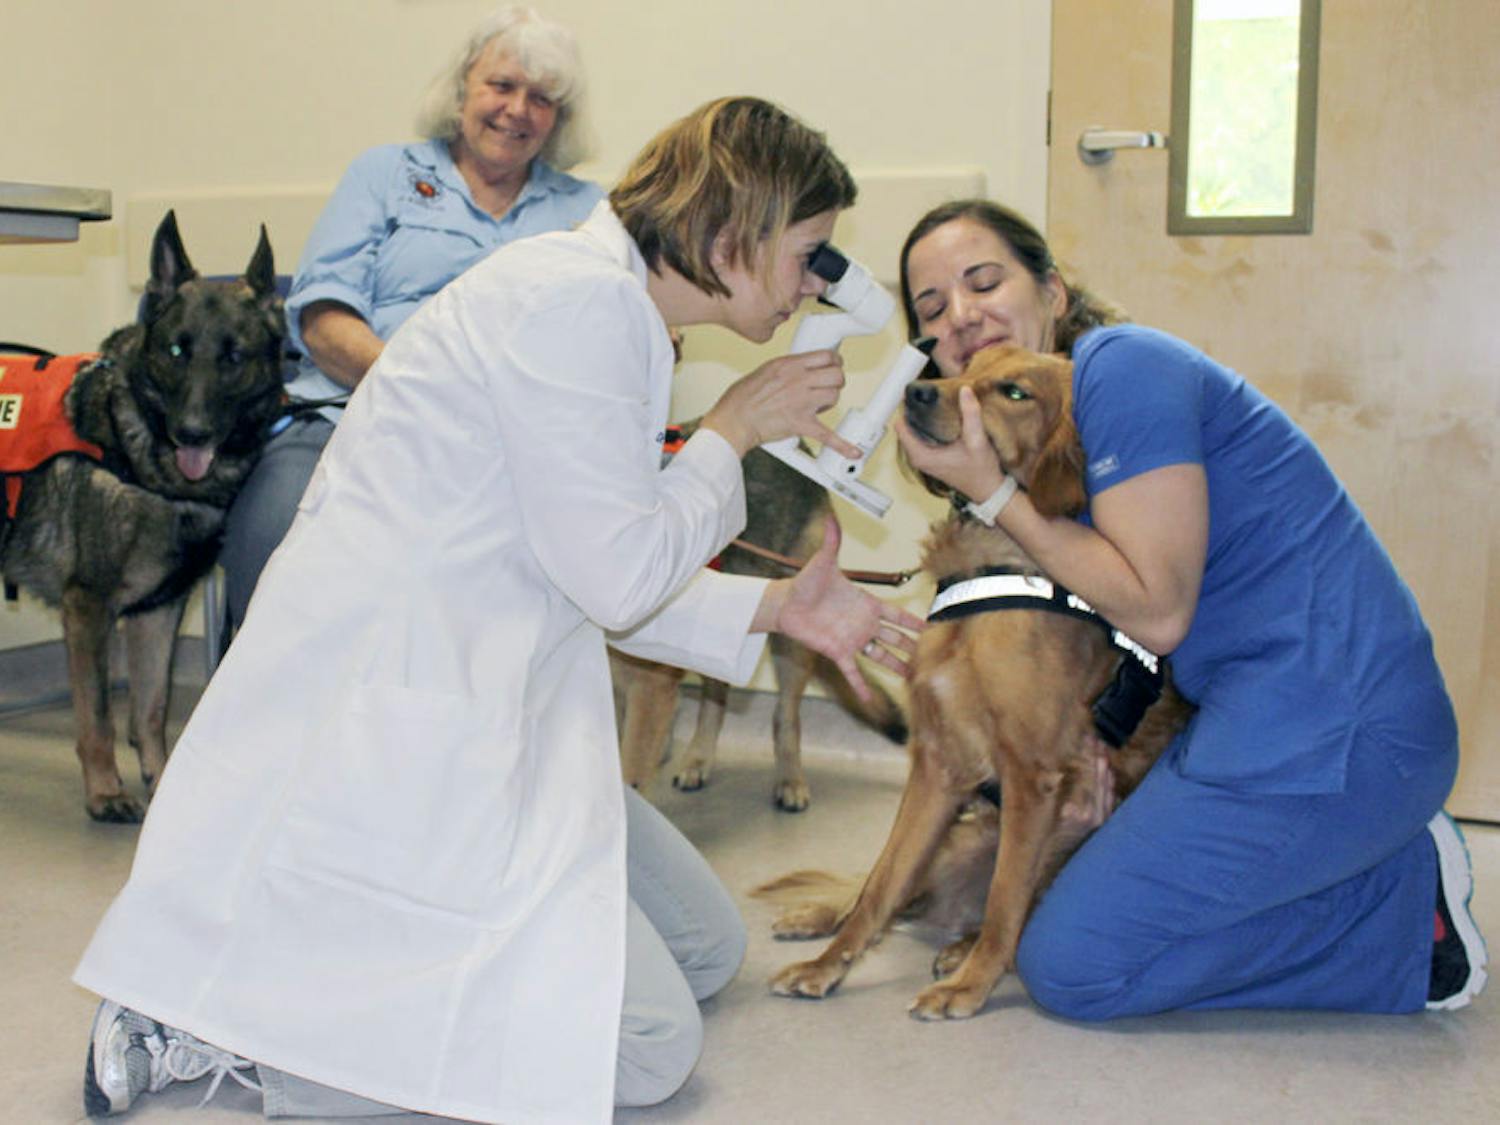 Dr. Caryn Plummer examines the eye of a service dog during the UF Small Animal Hospital’s service dog eye screening event in May.